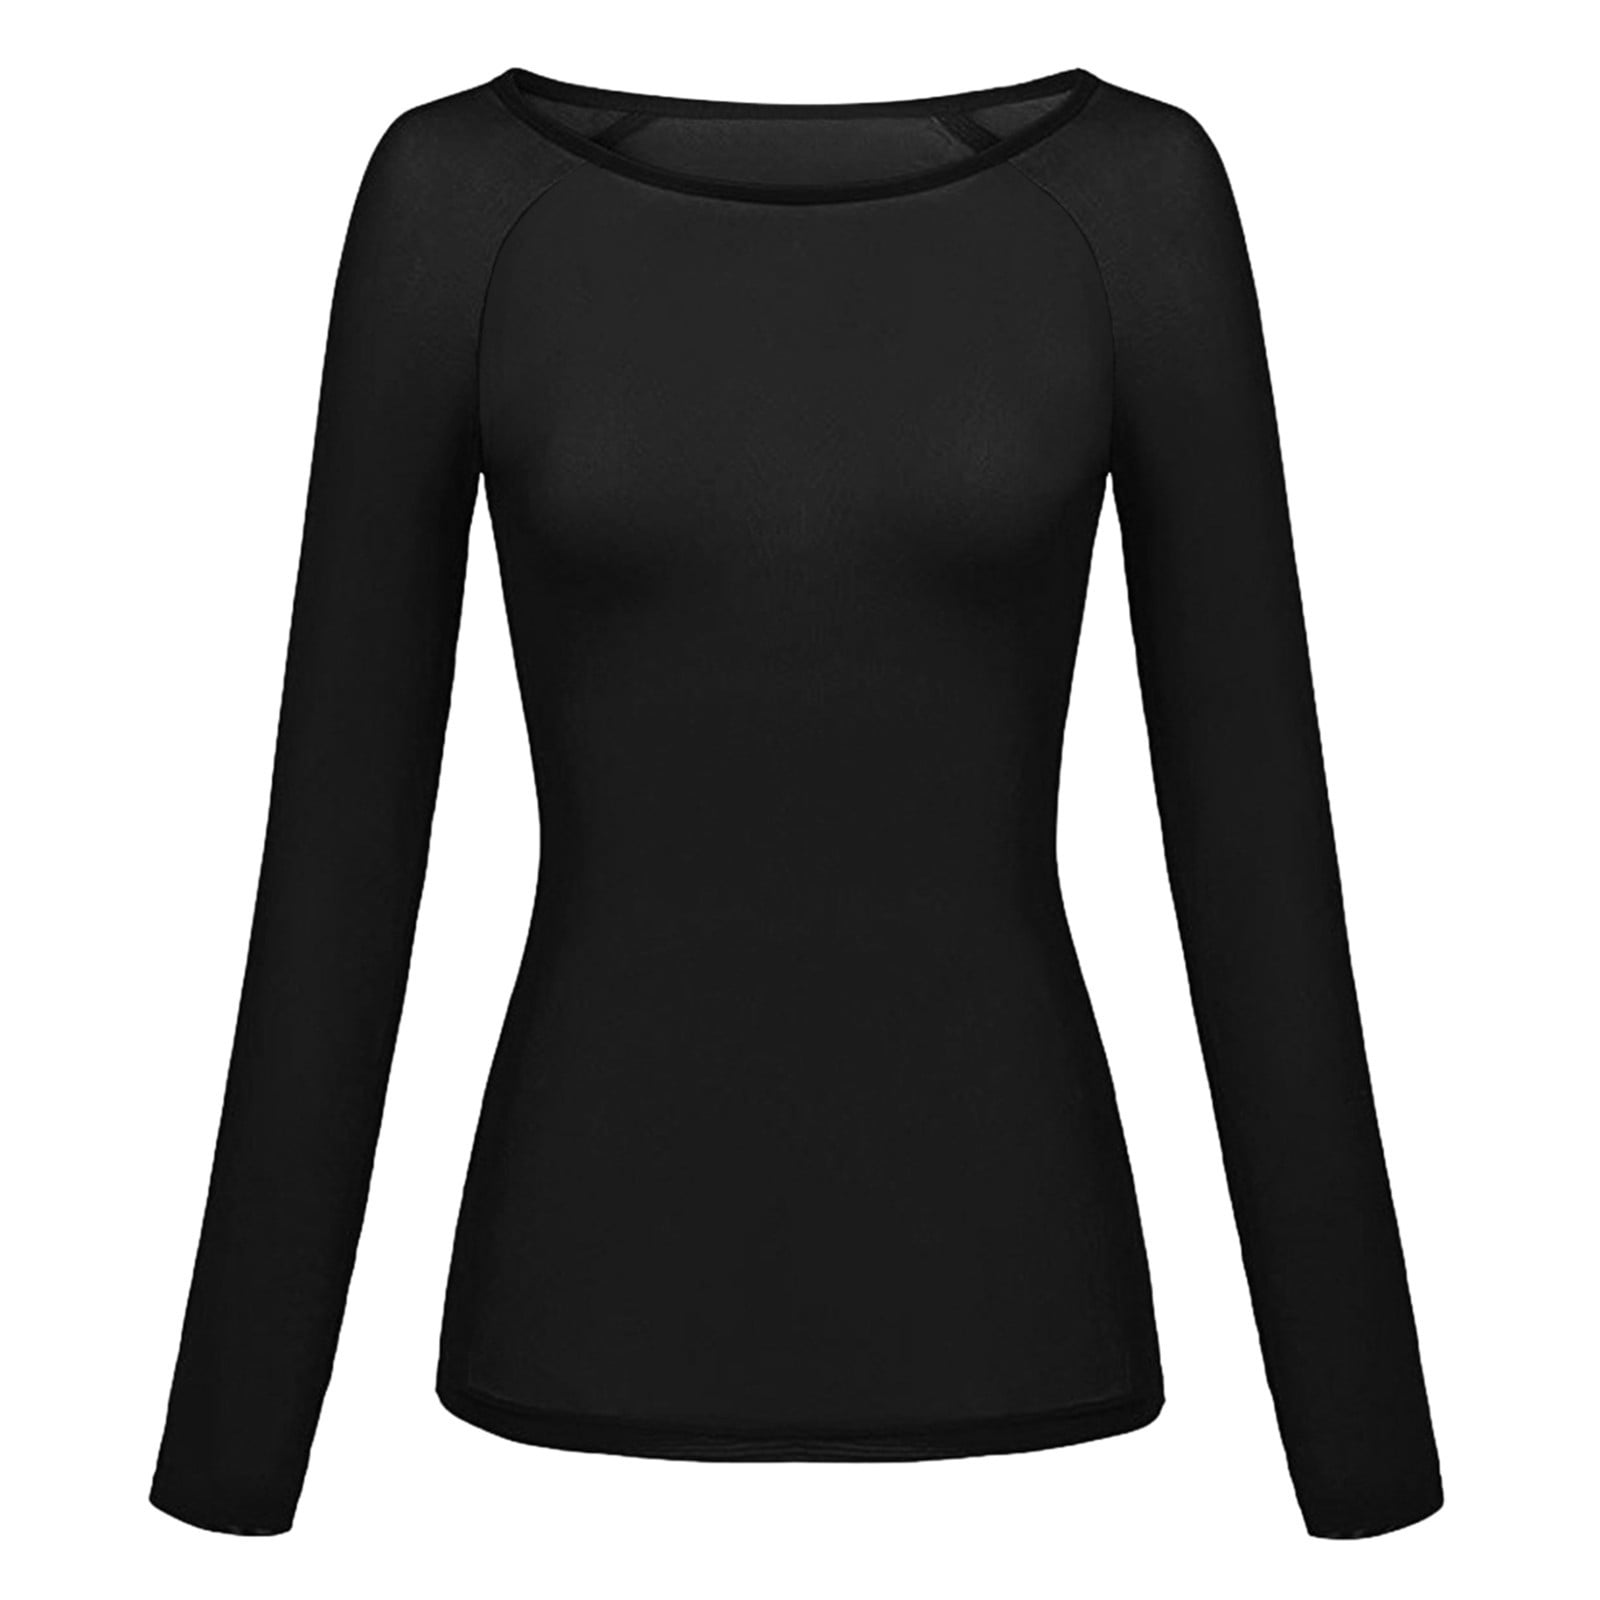  uhnmki Womens Tees Ladies' Solid Long Sleeve Halter Neck T  Shirt Exposes A Single Shoulder Base Oversized Tees for Women Black :  Clothing, Shoes & Jewelry